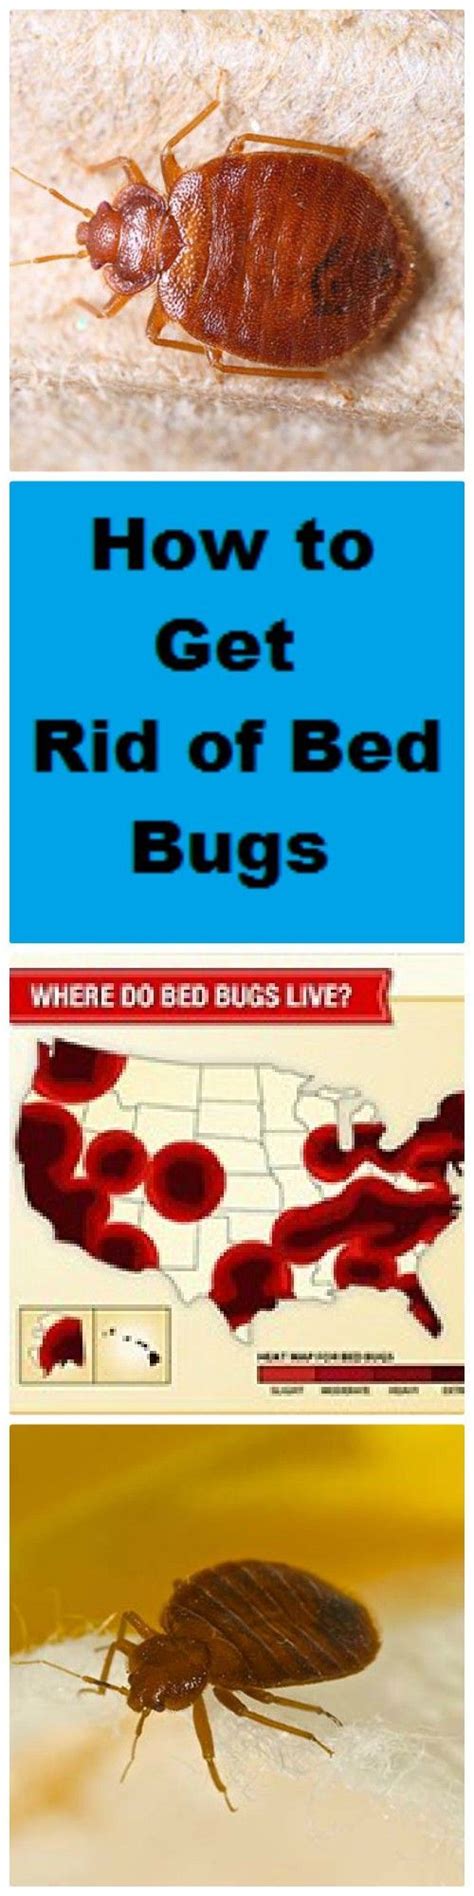 Have Bed Bugs Get Rid Of Them Quick With Domyowns Step By Step Guide